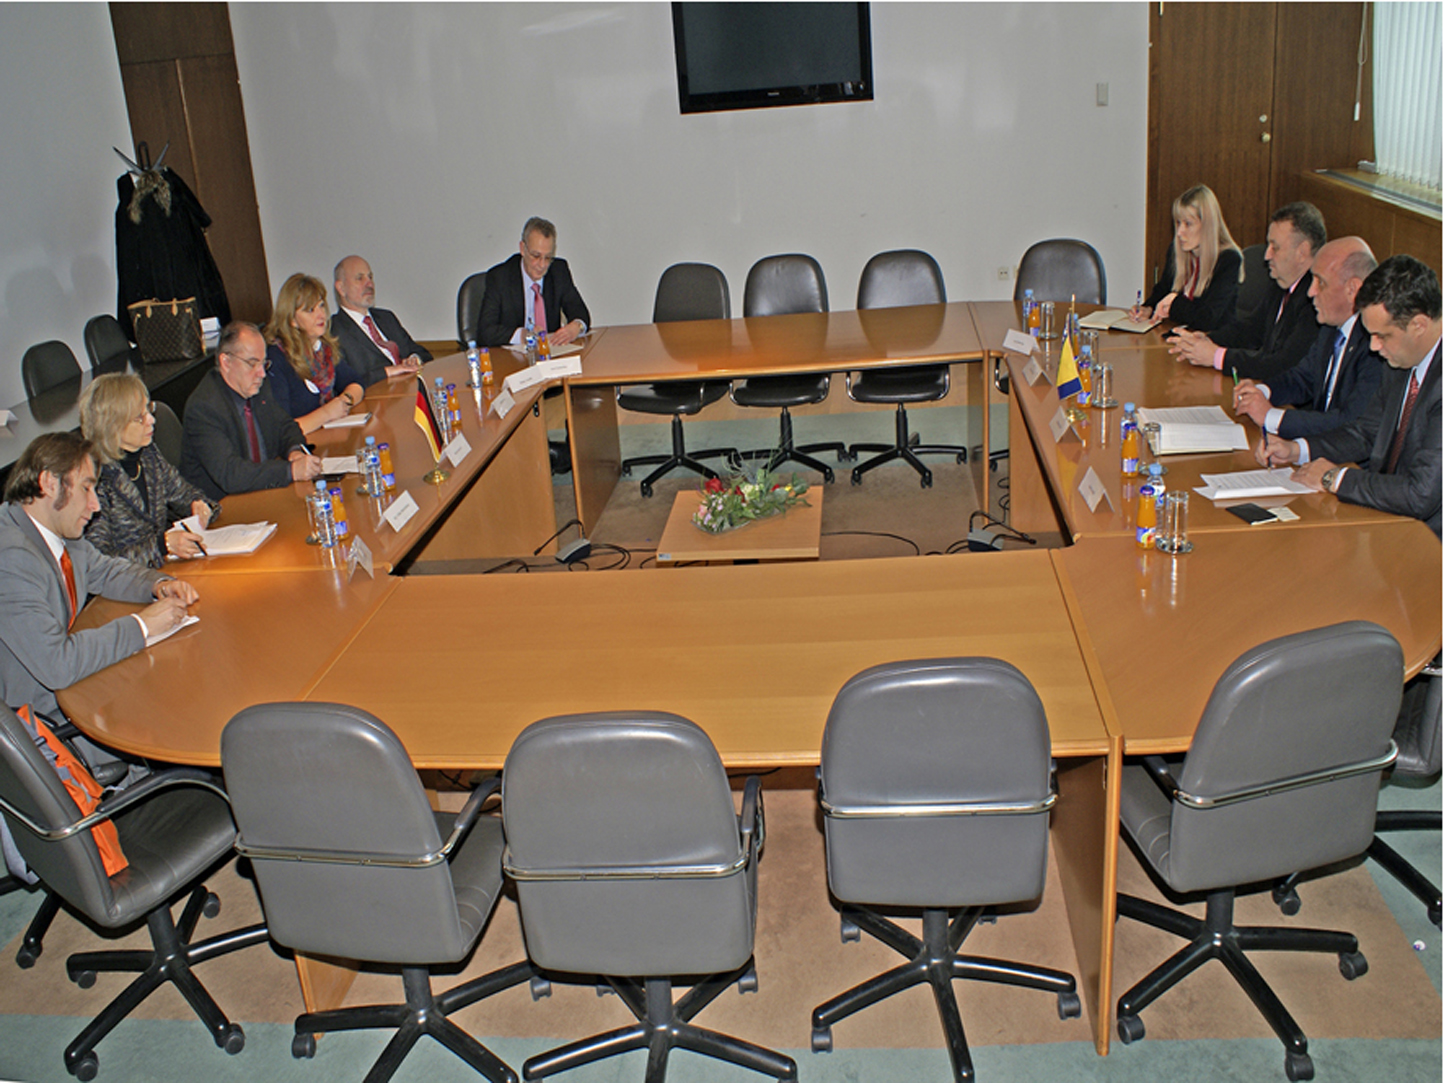 Members of the Friendship Group for Western Europe spoke with the Delegation of the German Bundestag 